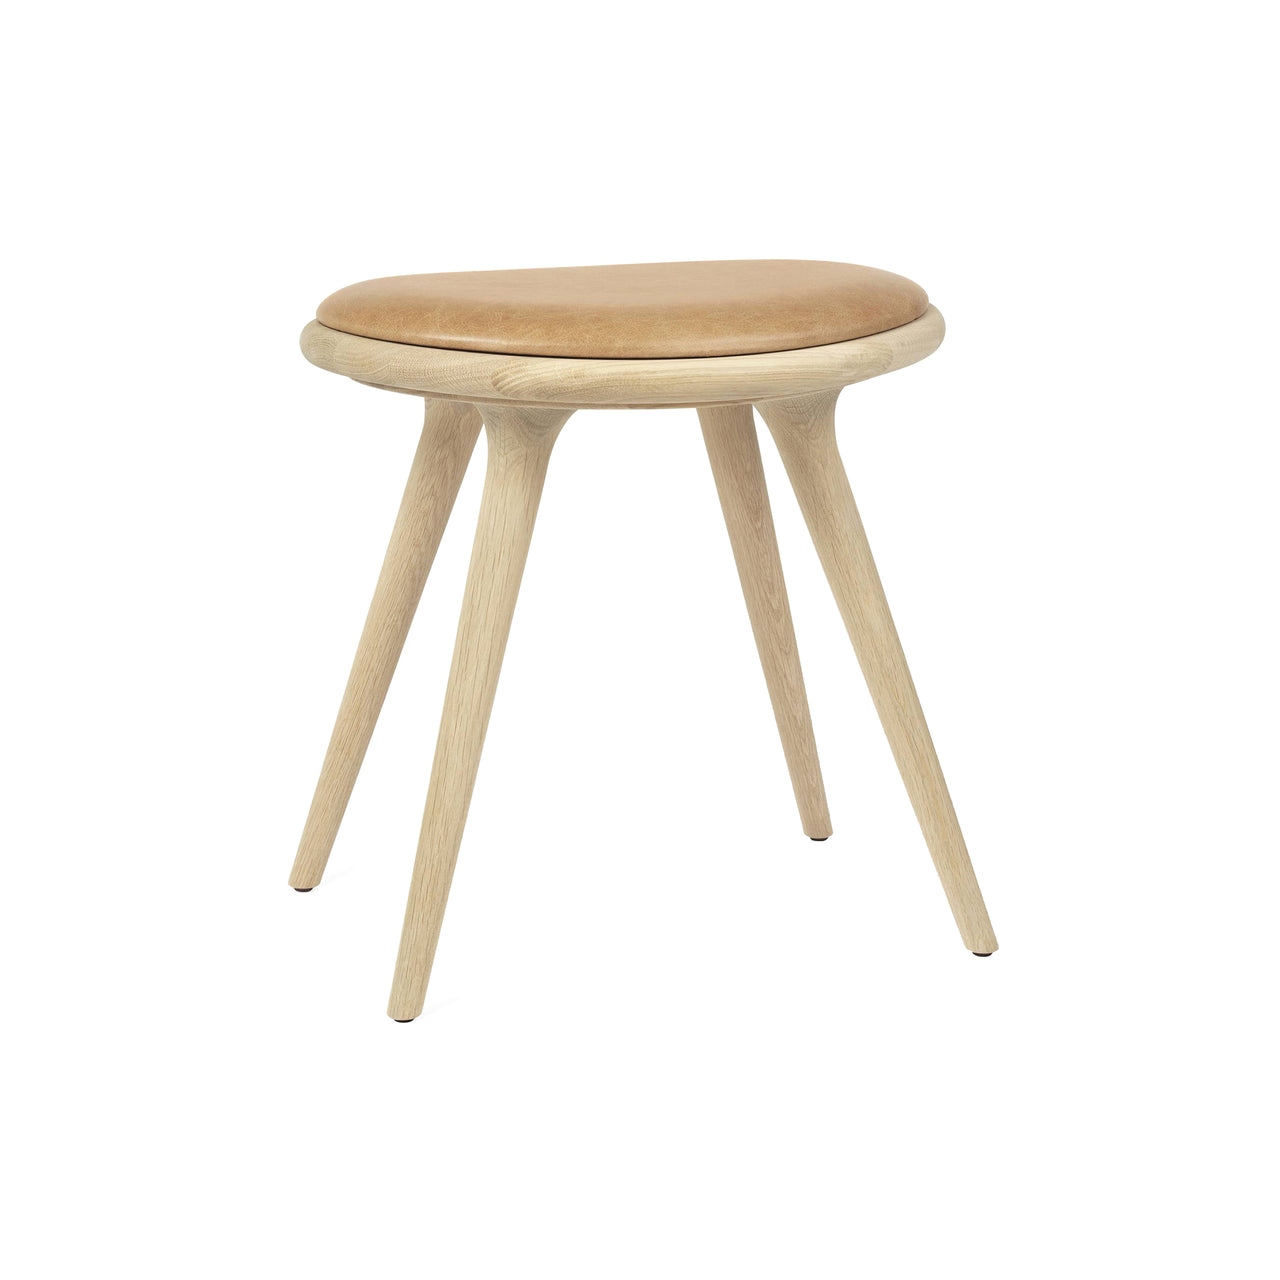 Low Stool: Soaped Oak + Natural Tanned Leather